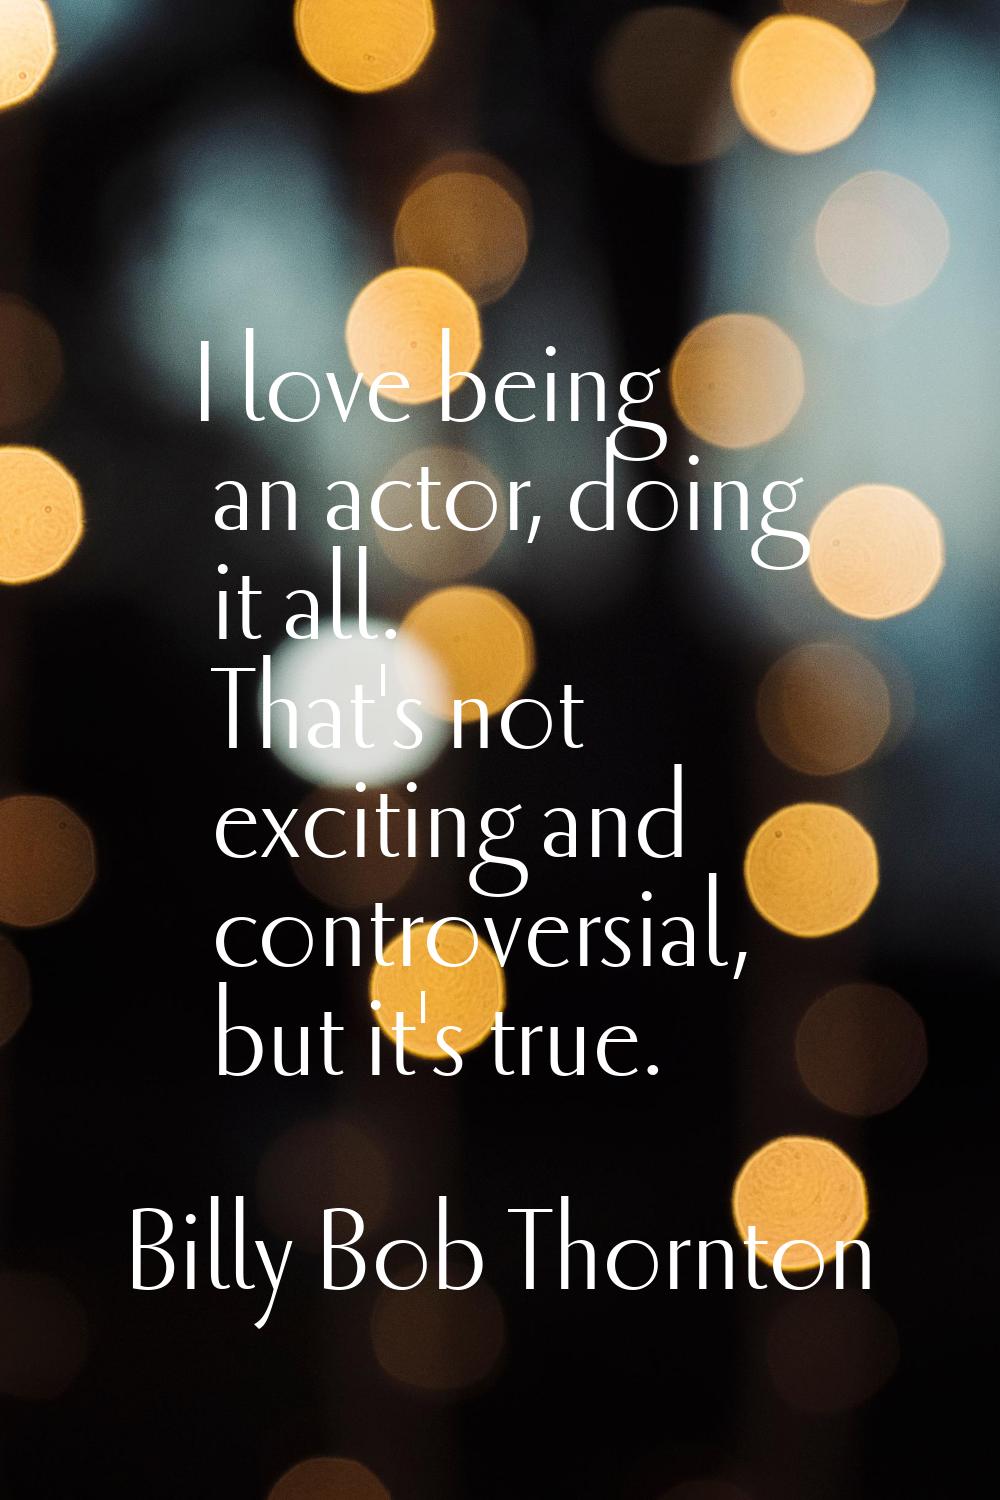 I love being an actor, doing it all. That's not exciting and controversial, but it's true.